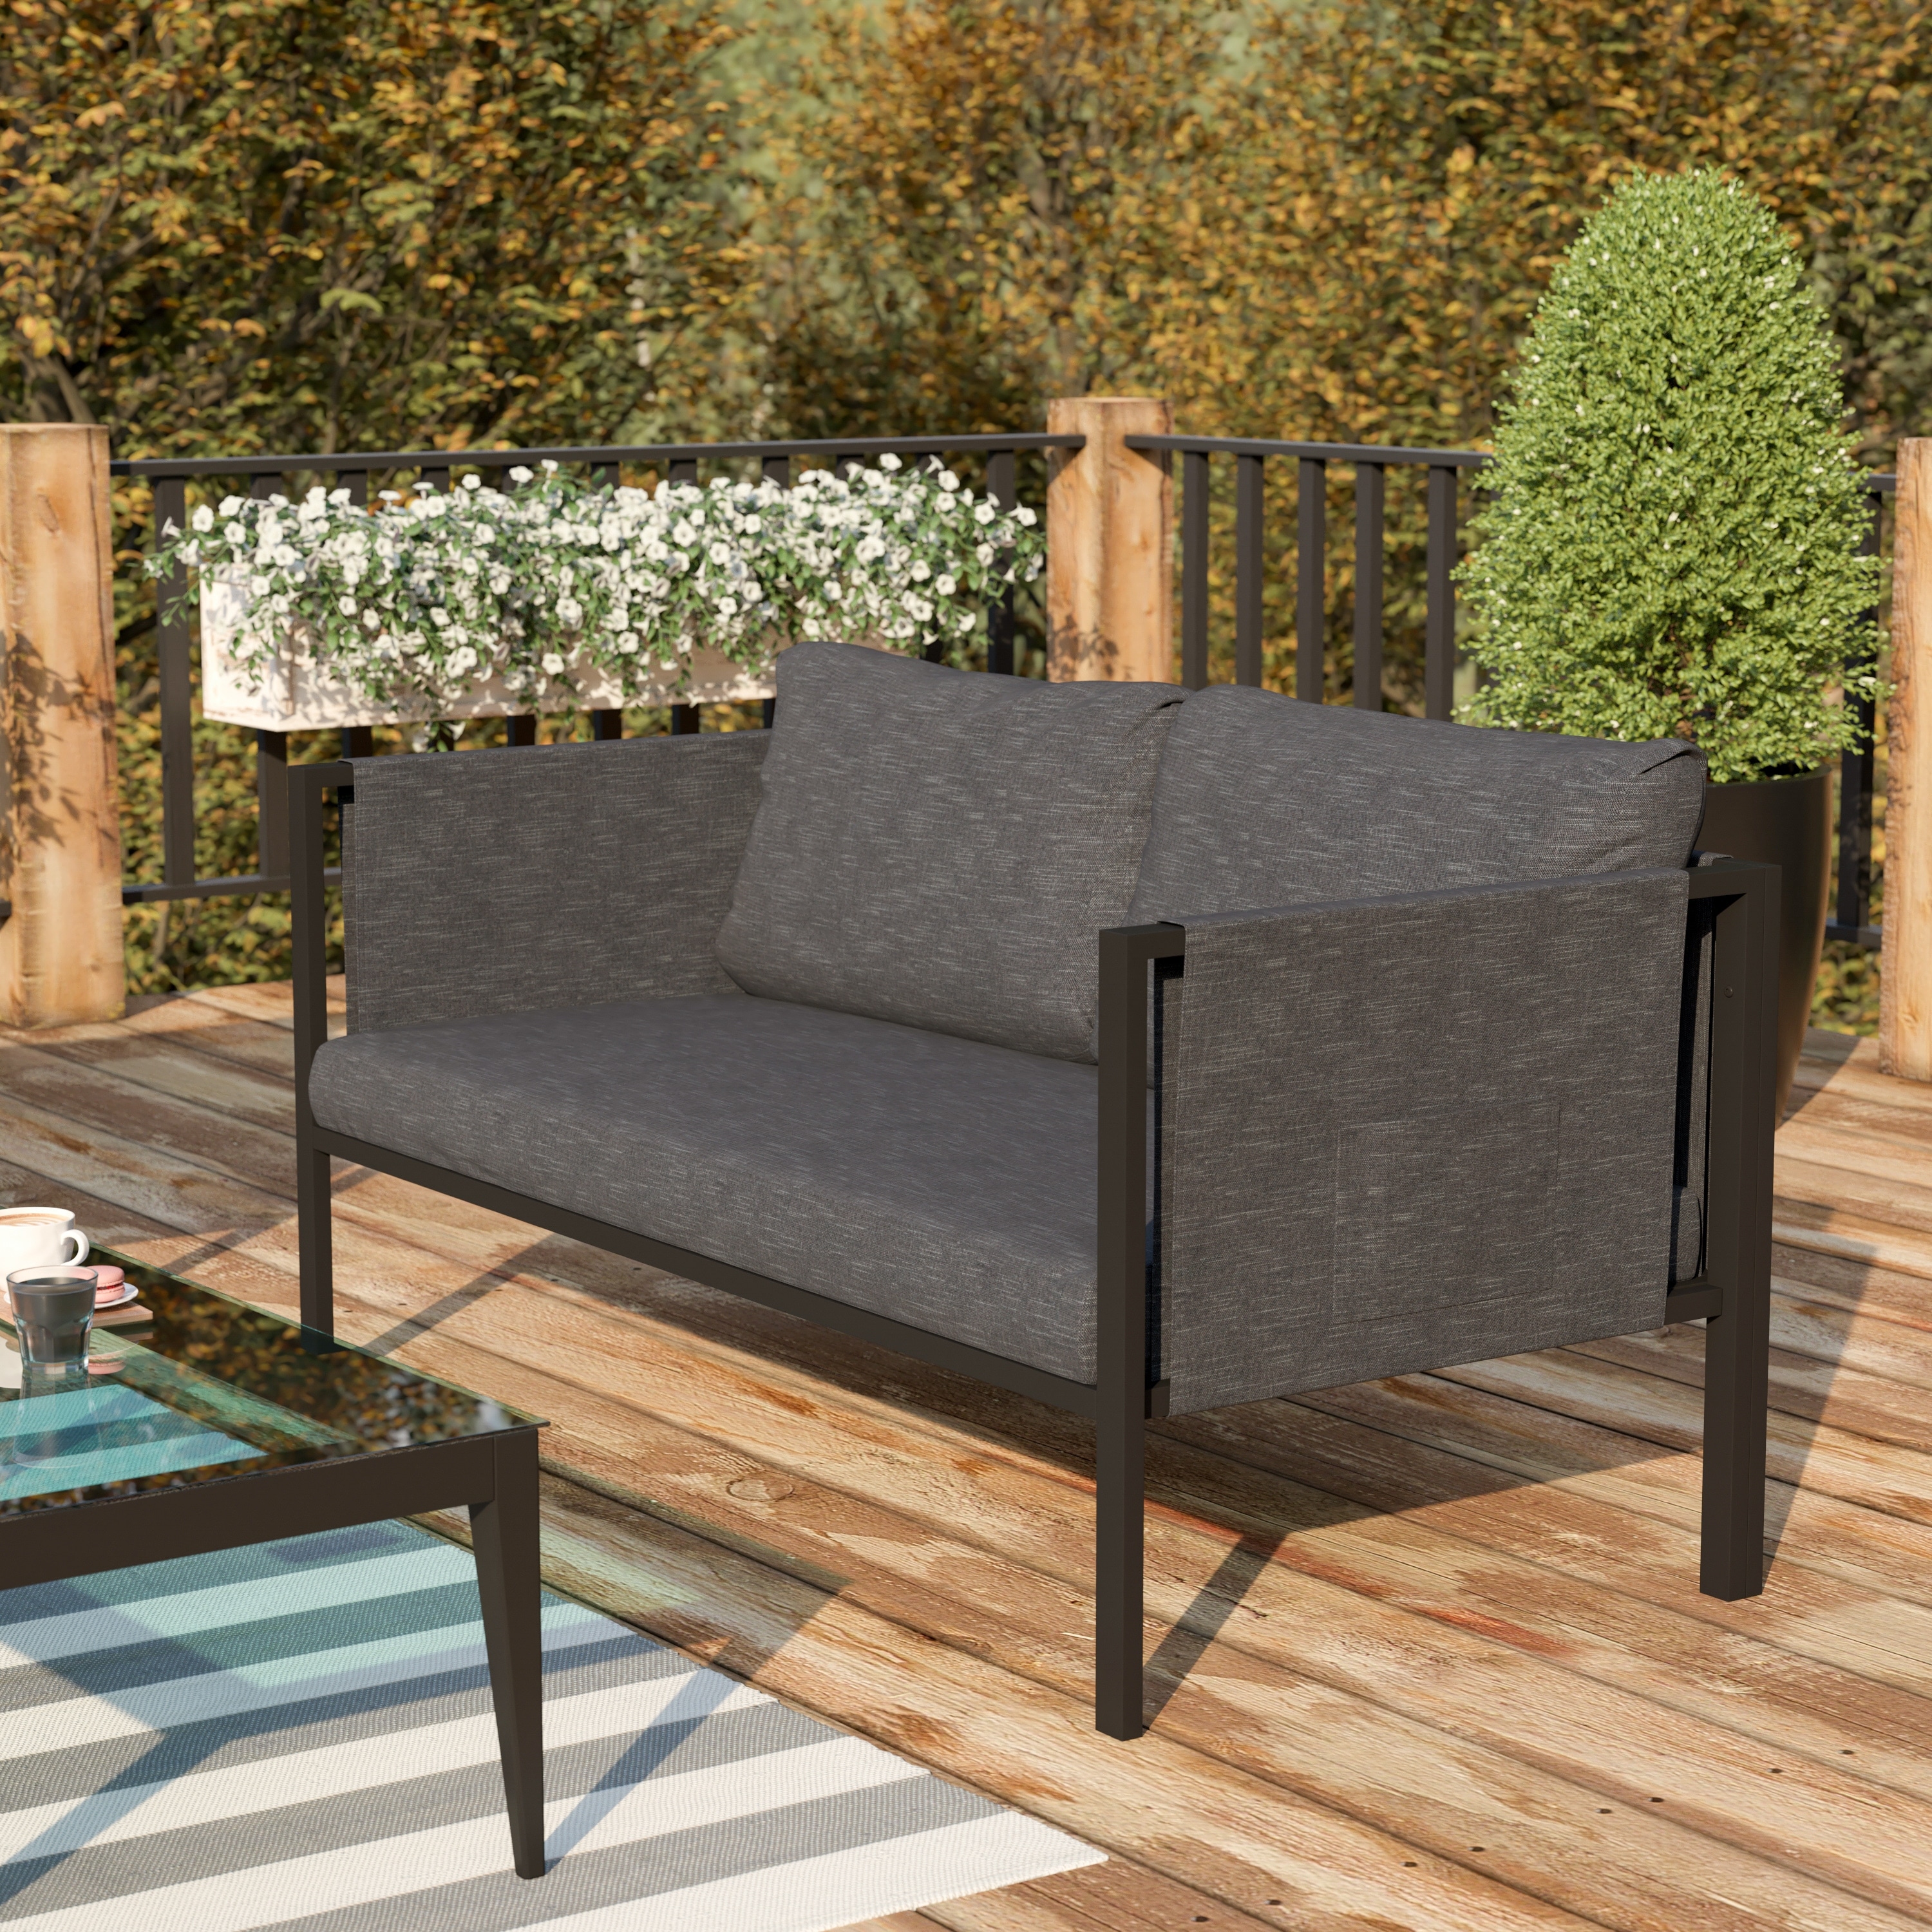 Steel Frame Loveseat With Included Cushions And Storage Pockets